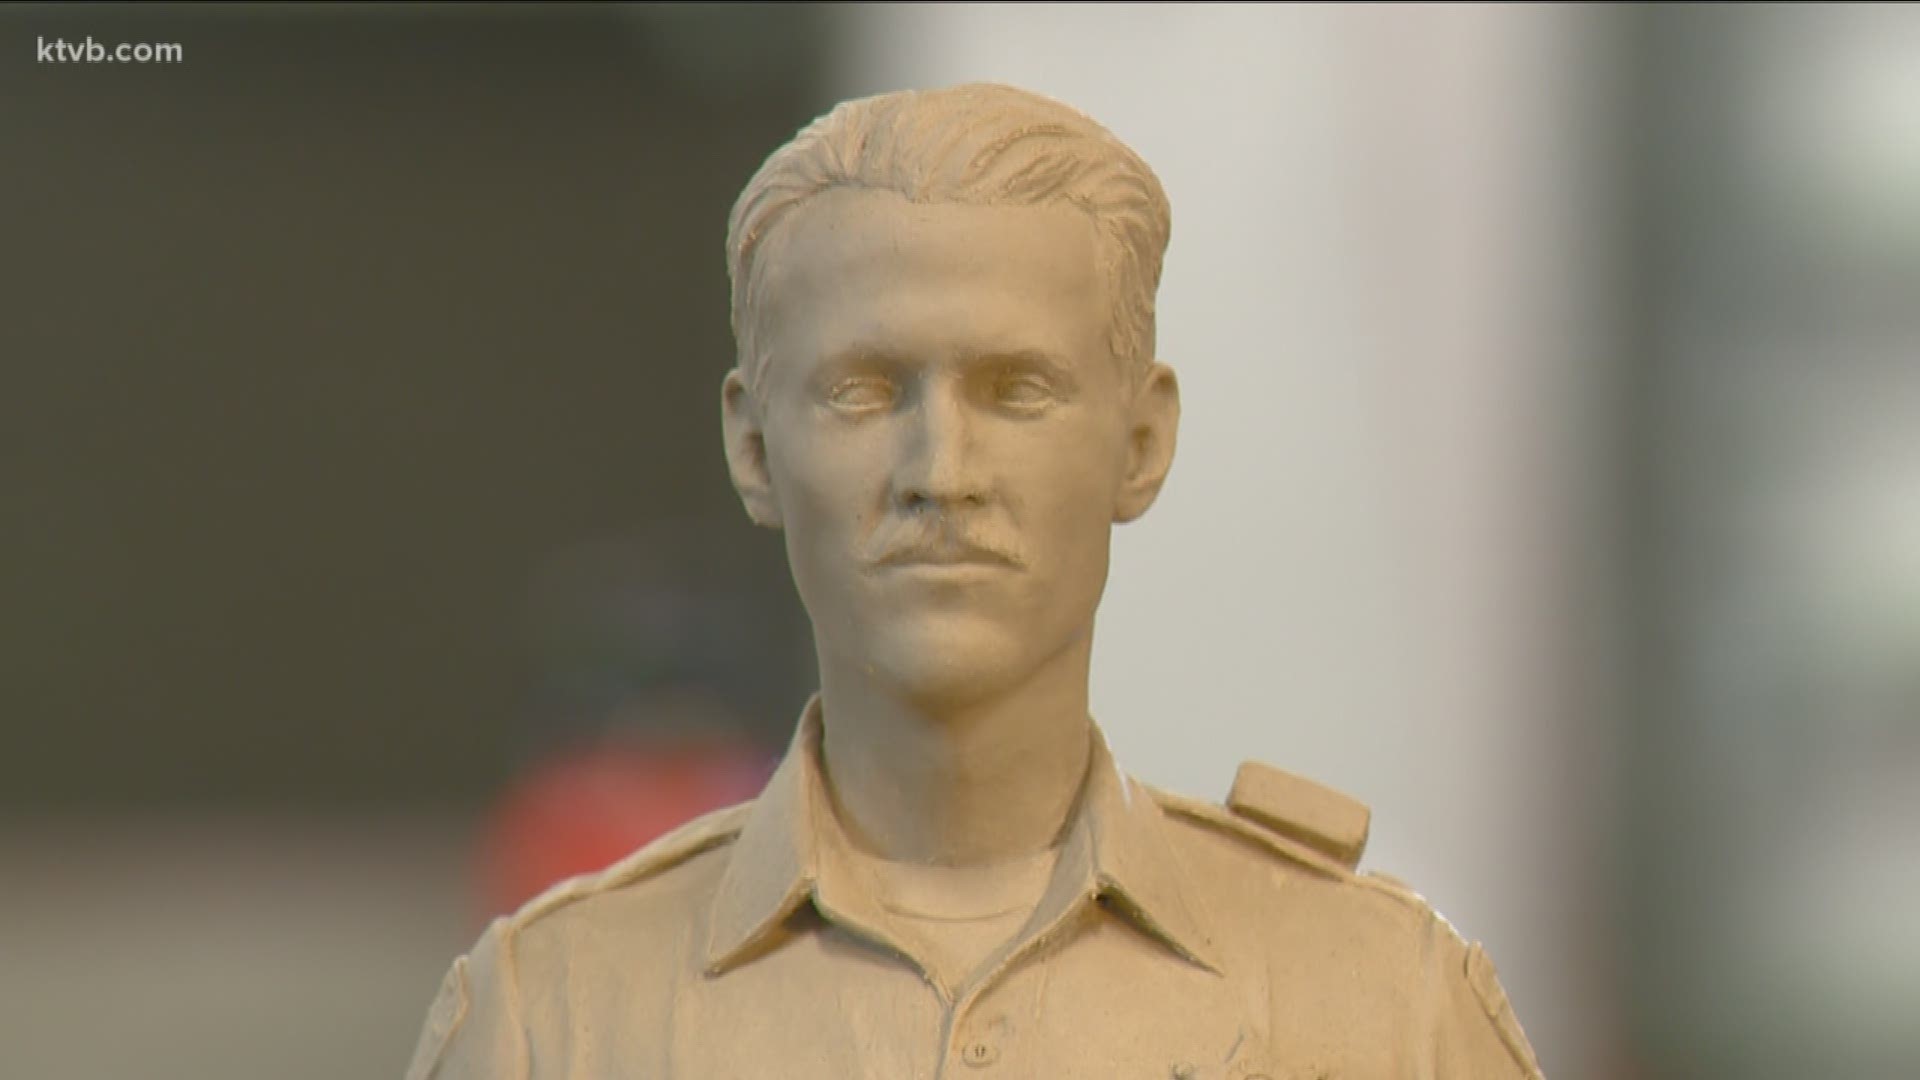 Community members, using only private donations, will need help to pay for the statue. They feel it is time to honor one of the city's heroes.